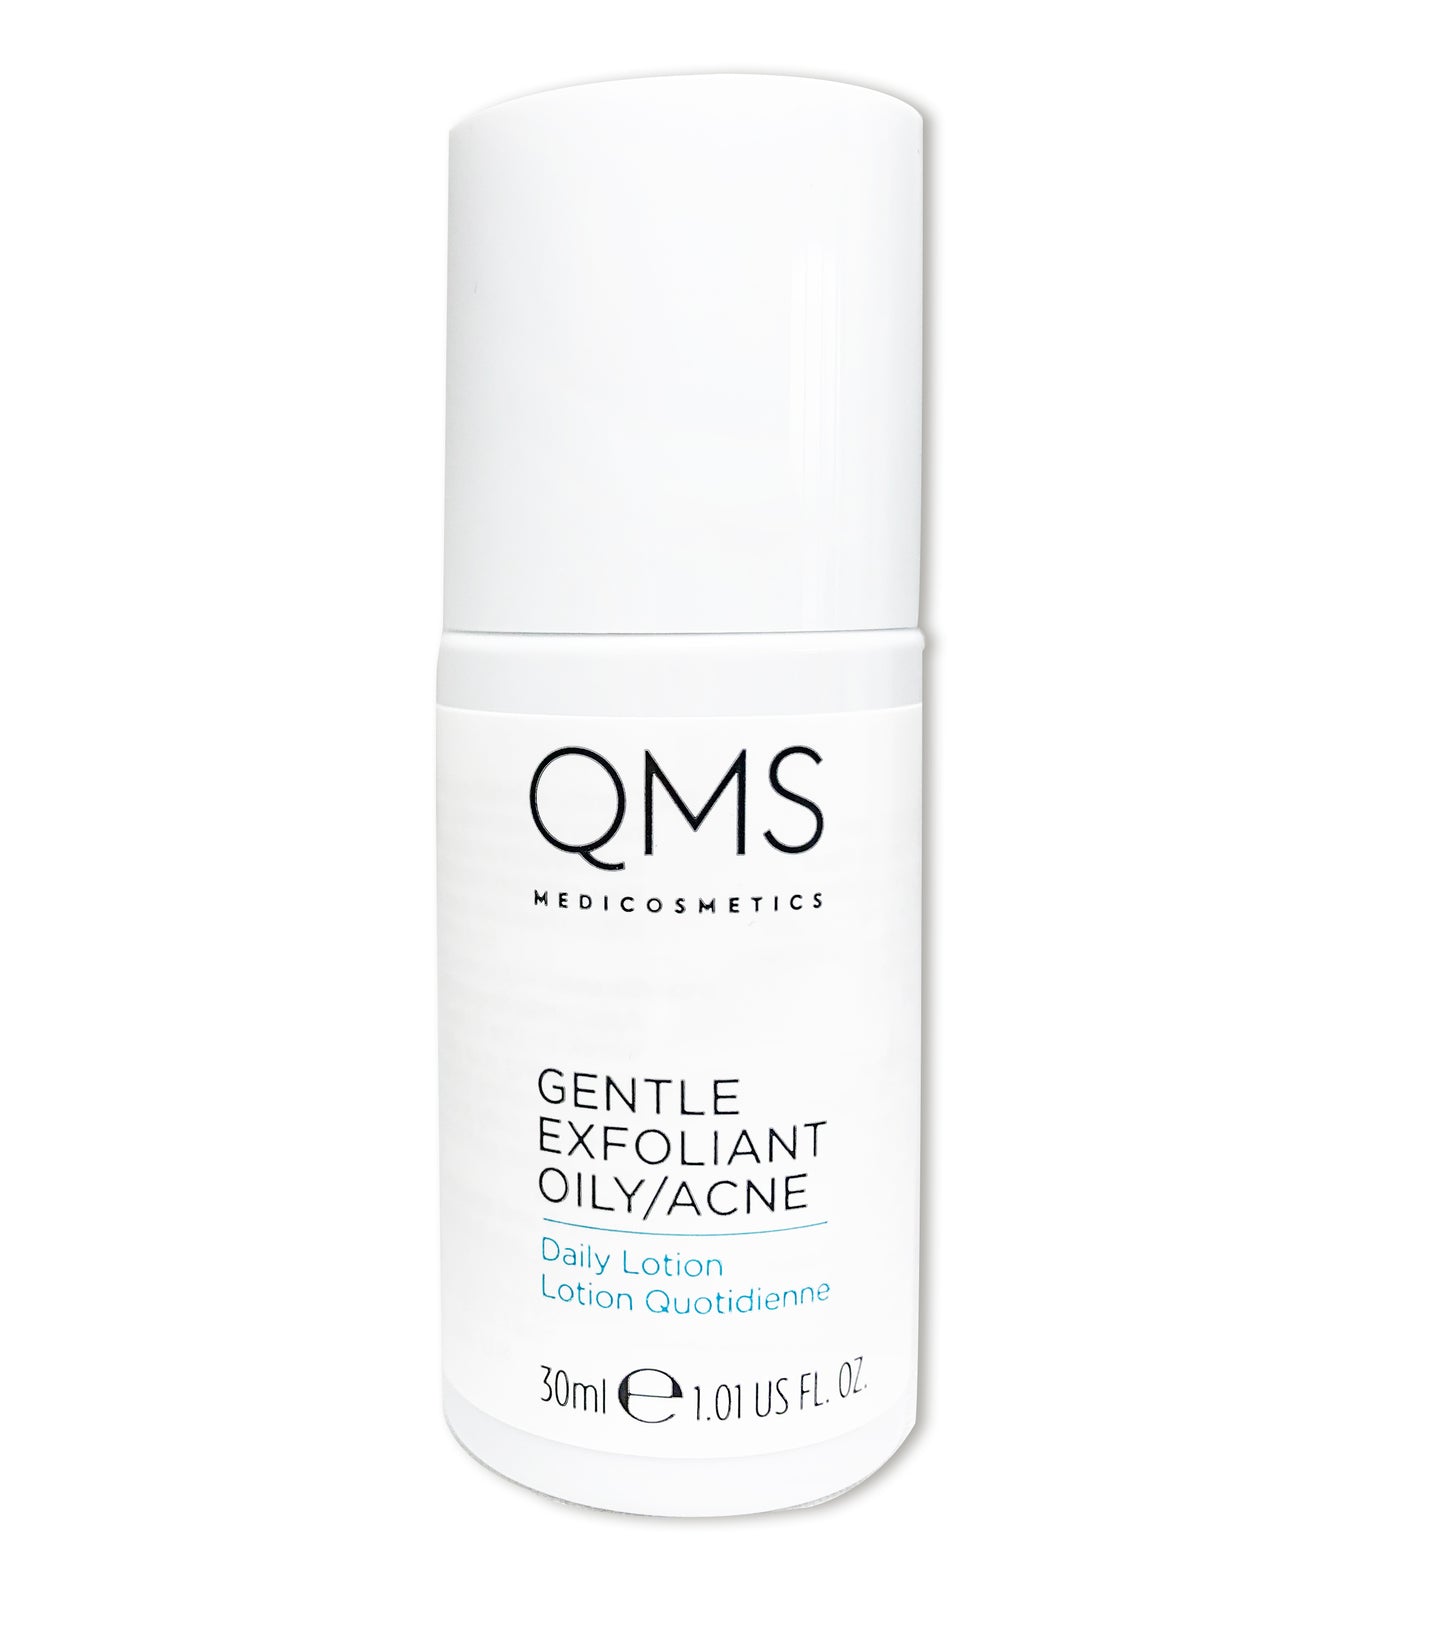 QMS Gentle Exfoliant Daily Lotion Oily/Acne 30 ml (discover size)